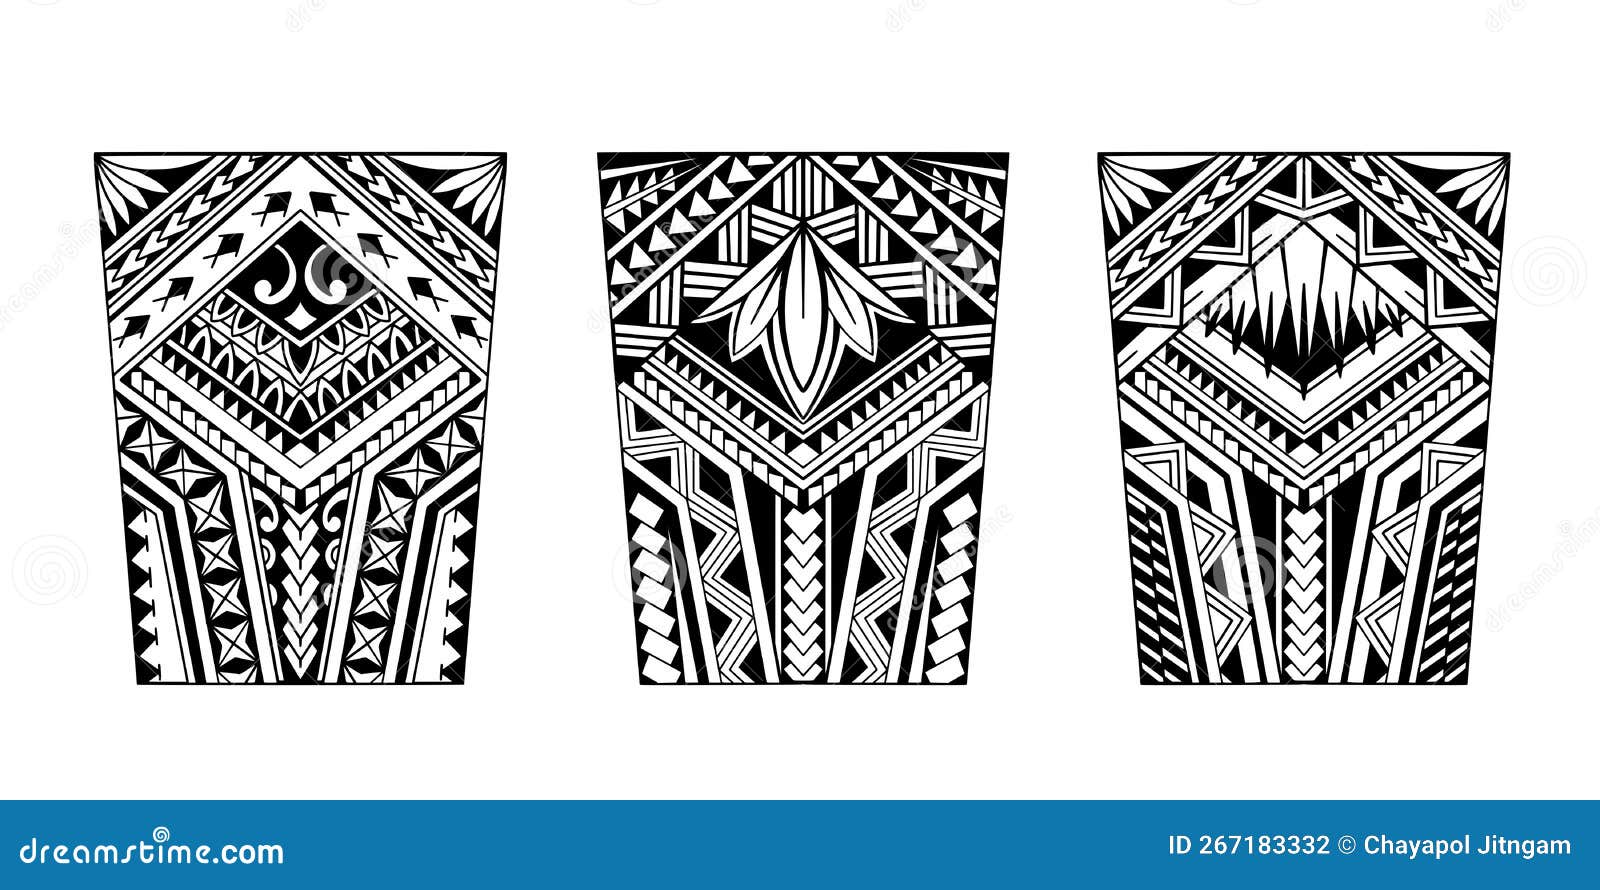 Polynesian Tattoo Lower Arm Half Sleeve  Polynesian Tattoo Lower Arm Half  Sleeve For your Tattoo Inquiries click  httpsmmeinkmoti2019  InkedByMiguelLagbas MotiInk Tattoo Tattoos Inked  By MOTI INK   Miguel Lagbas